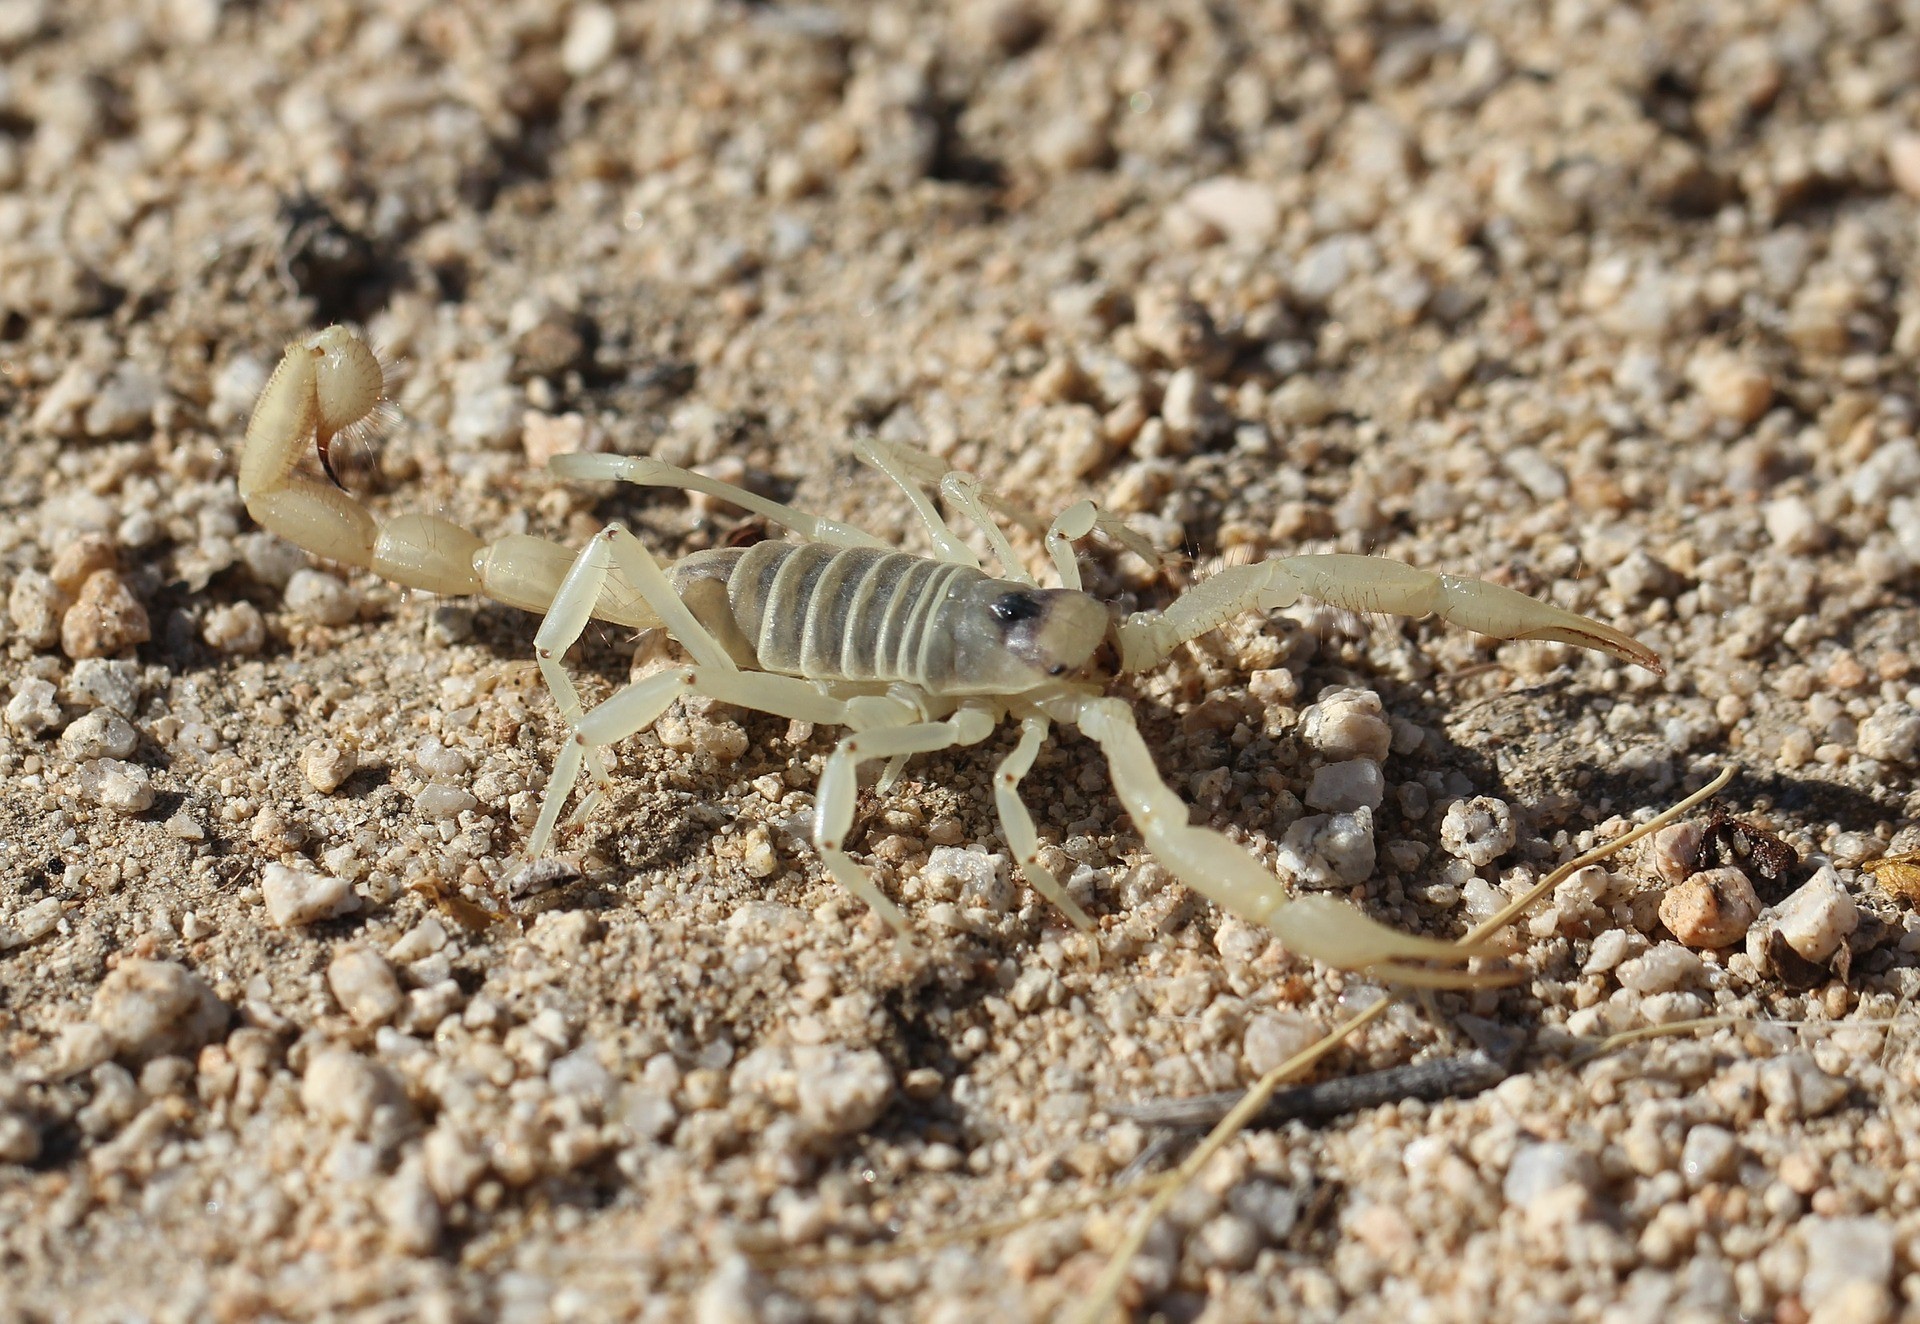 scorpion, scorpion control, idaho scorpion, scorpion facts